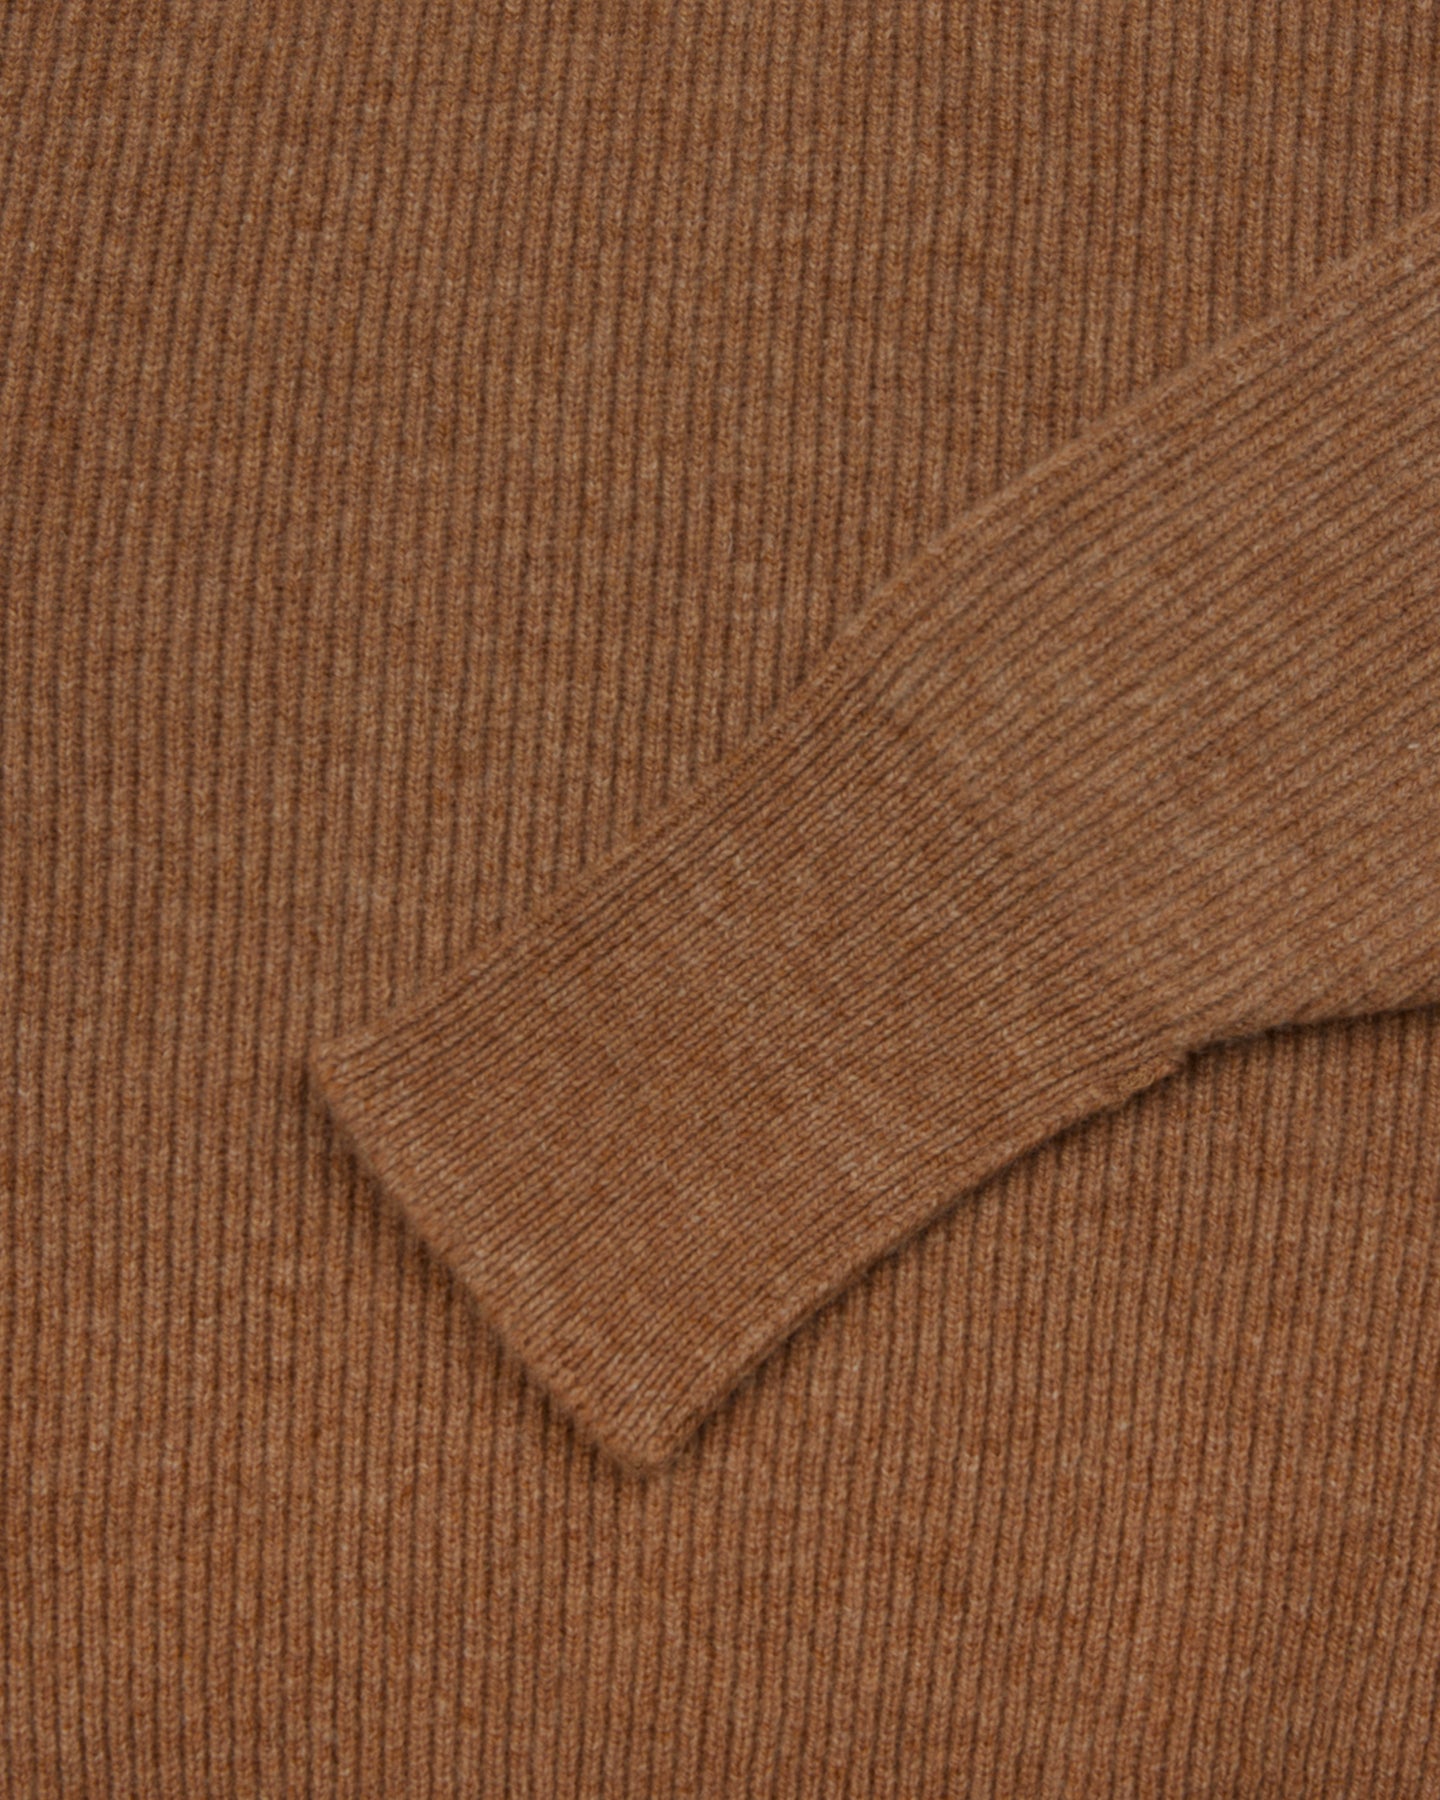 Camel Lambswool Ribbed Rollneck Sweater